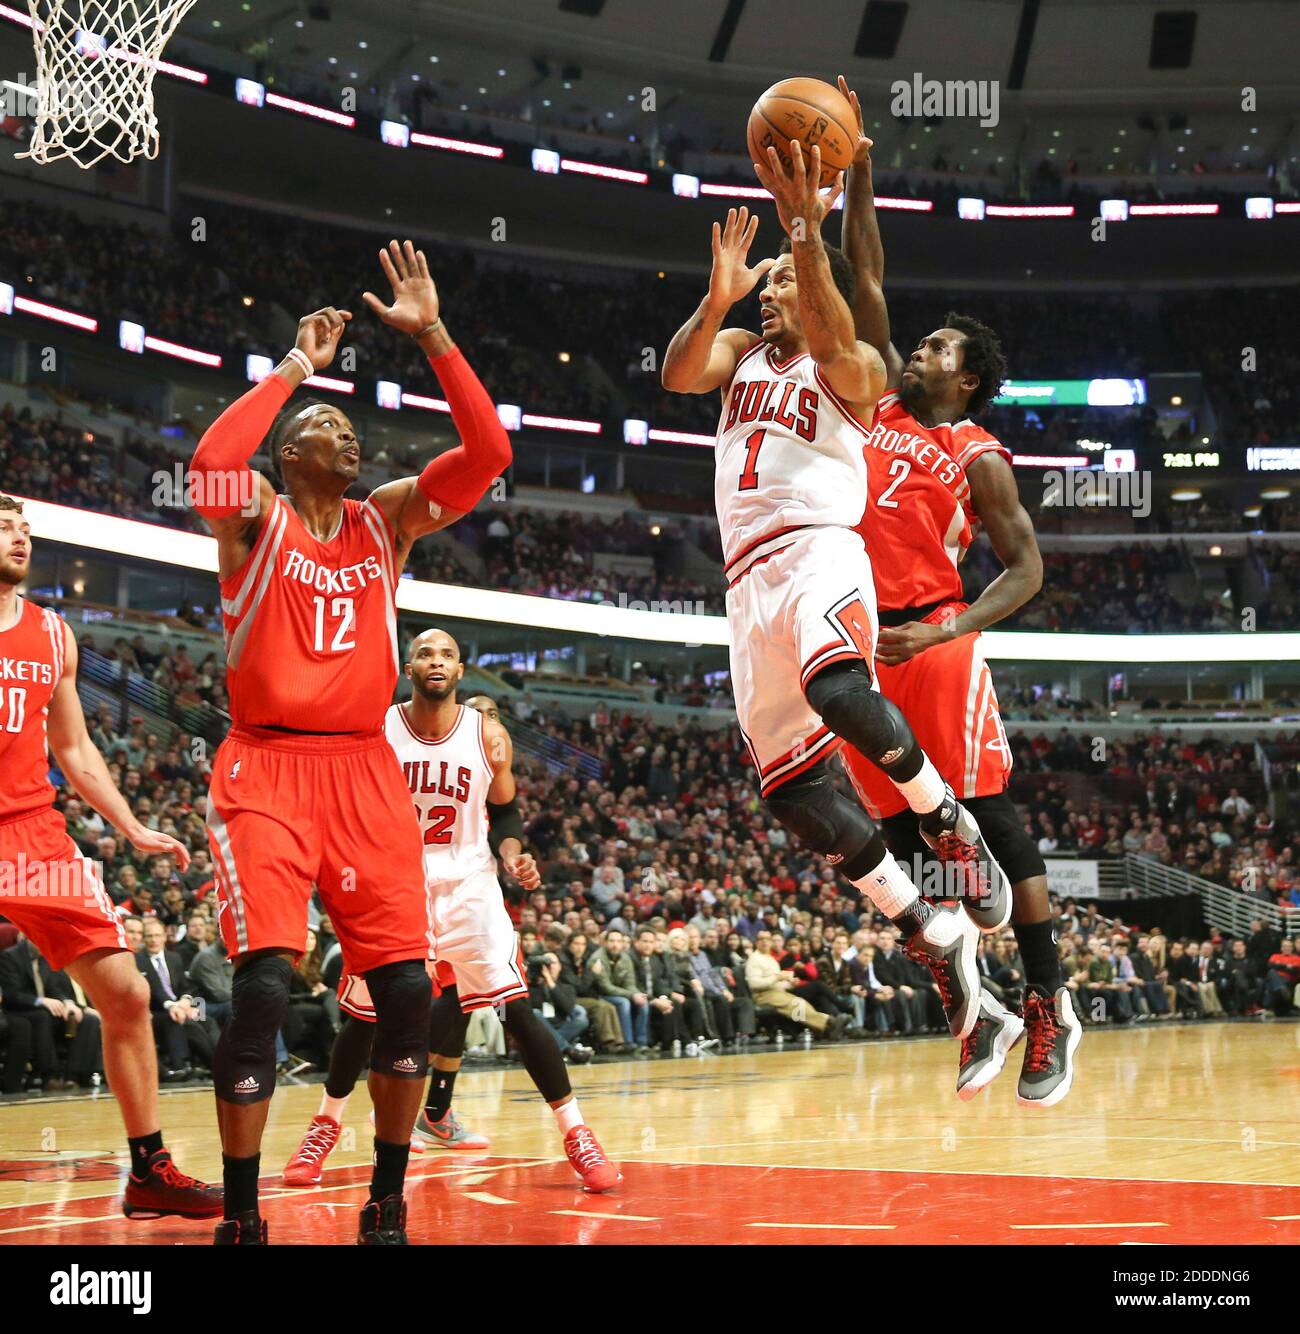 NO FILM, NO VIDEO, NO TV, NO DOCUMENTARY - Chicago Bulls guard Derrick Rose  (1) goes to the basket against Houston Rockets center Dwight Howard (12)  during the first half at the